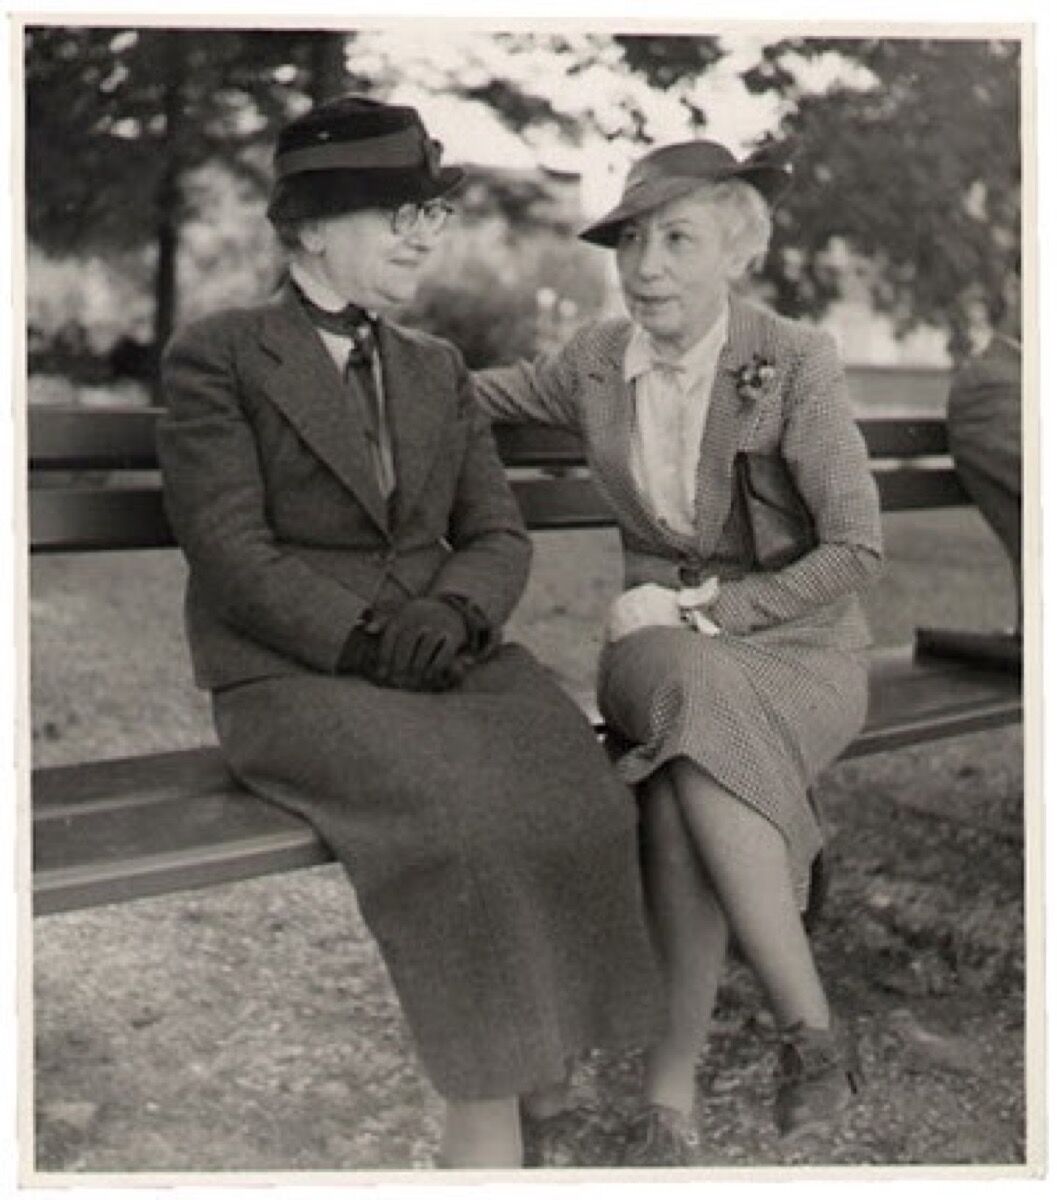 Berthe Weill and a friend, from the Berthe Weill Archive. Courtesy of Marianne Le Morvan. 